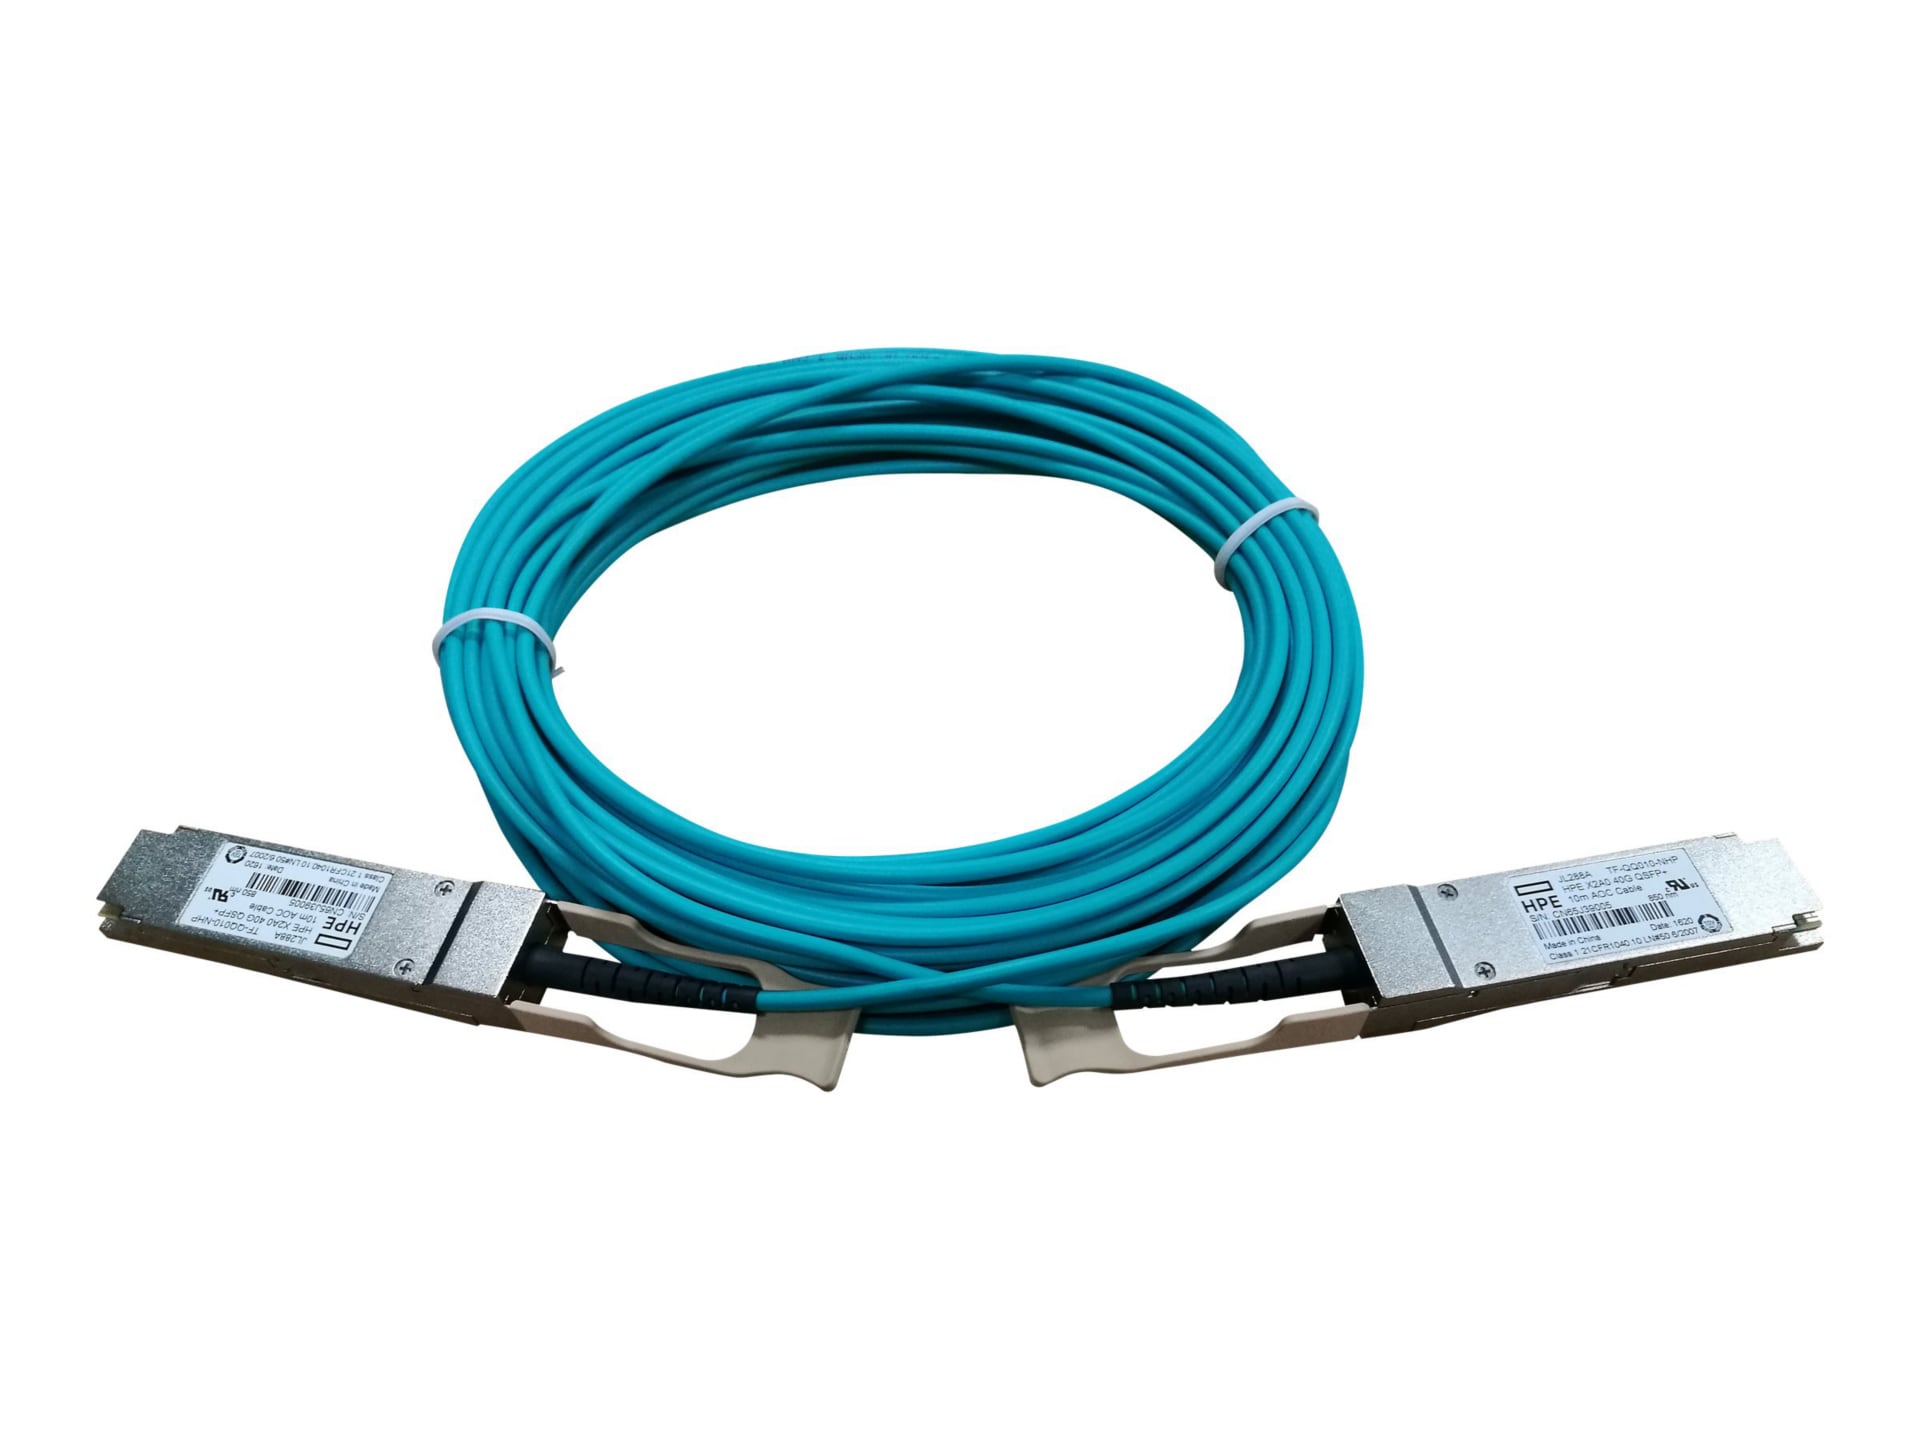 HPE X2A0 network cable - 10 m